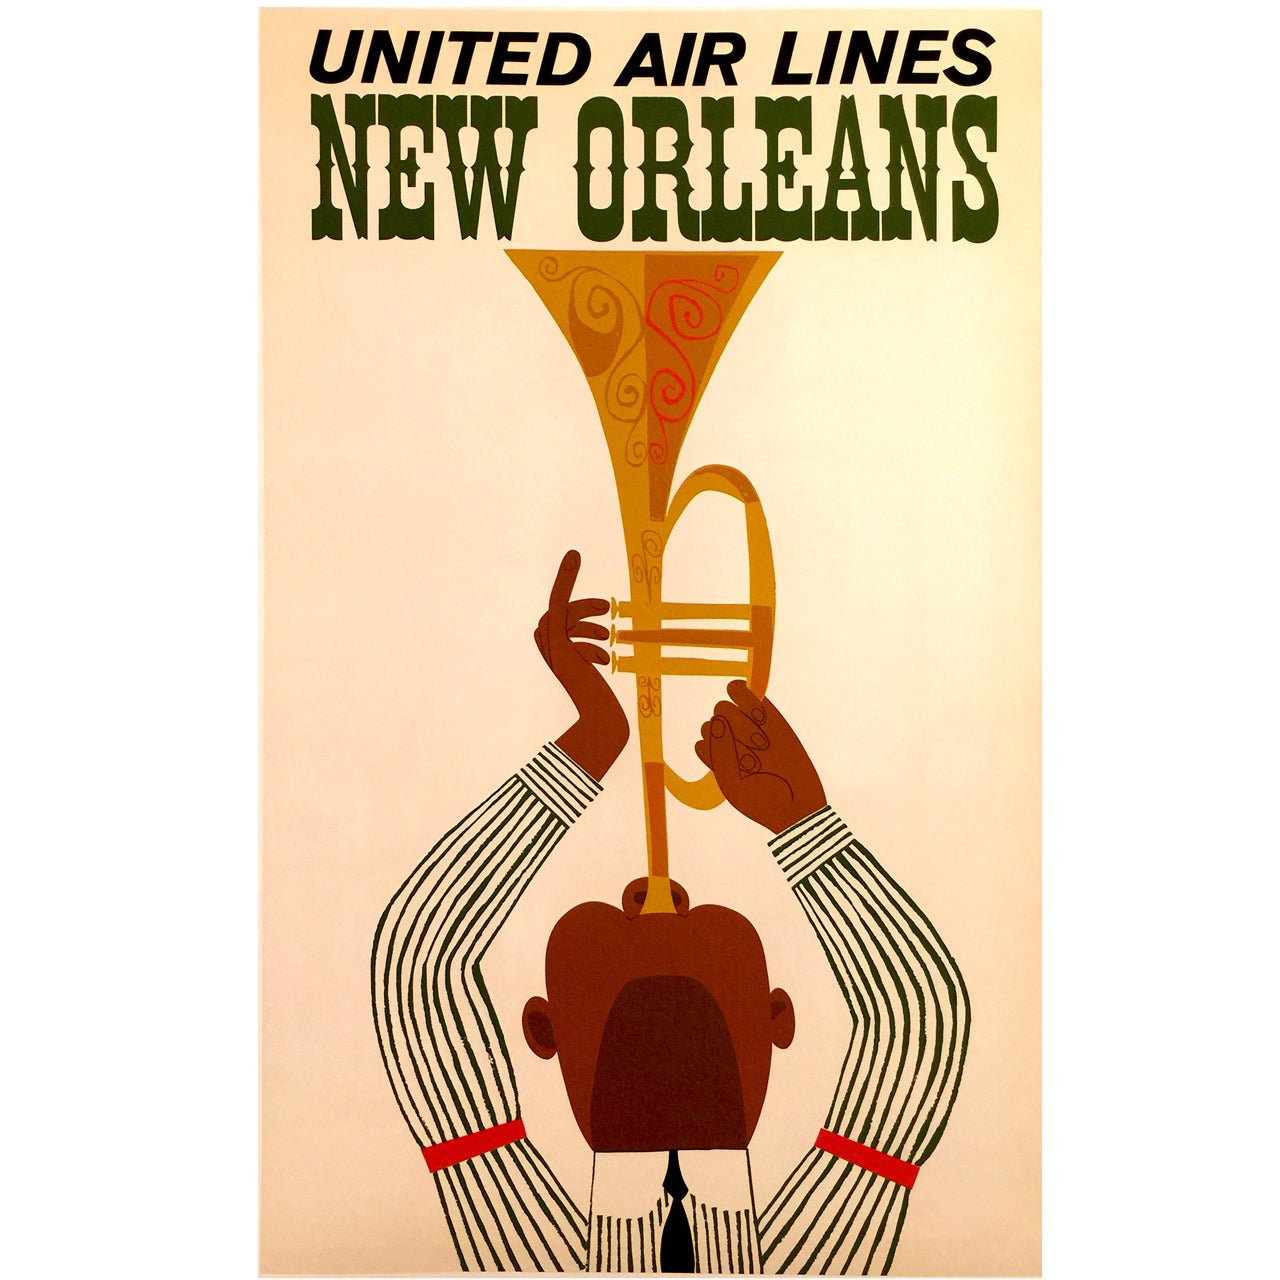 Mid-Century Modern Period United Air Lines Travel Poster for New Orleans